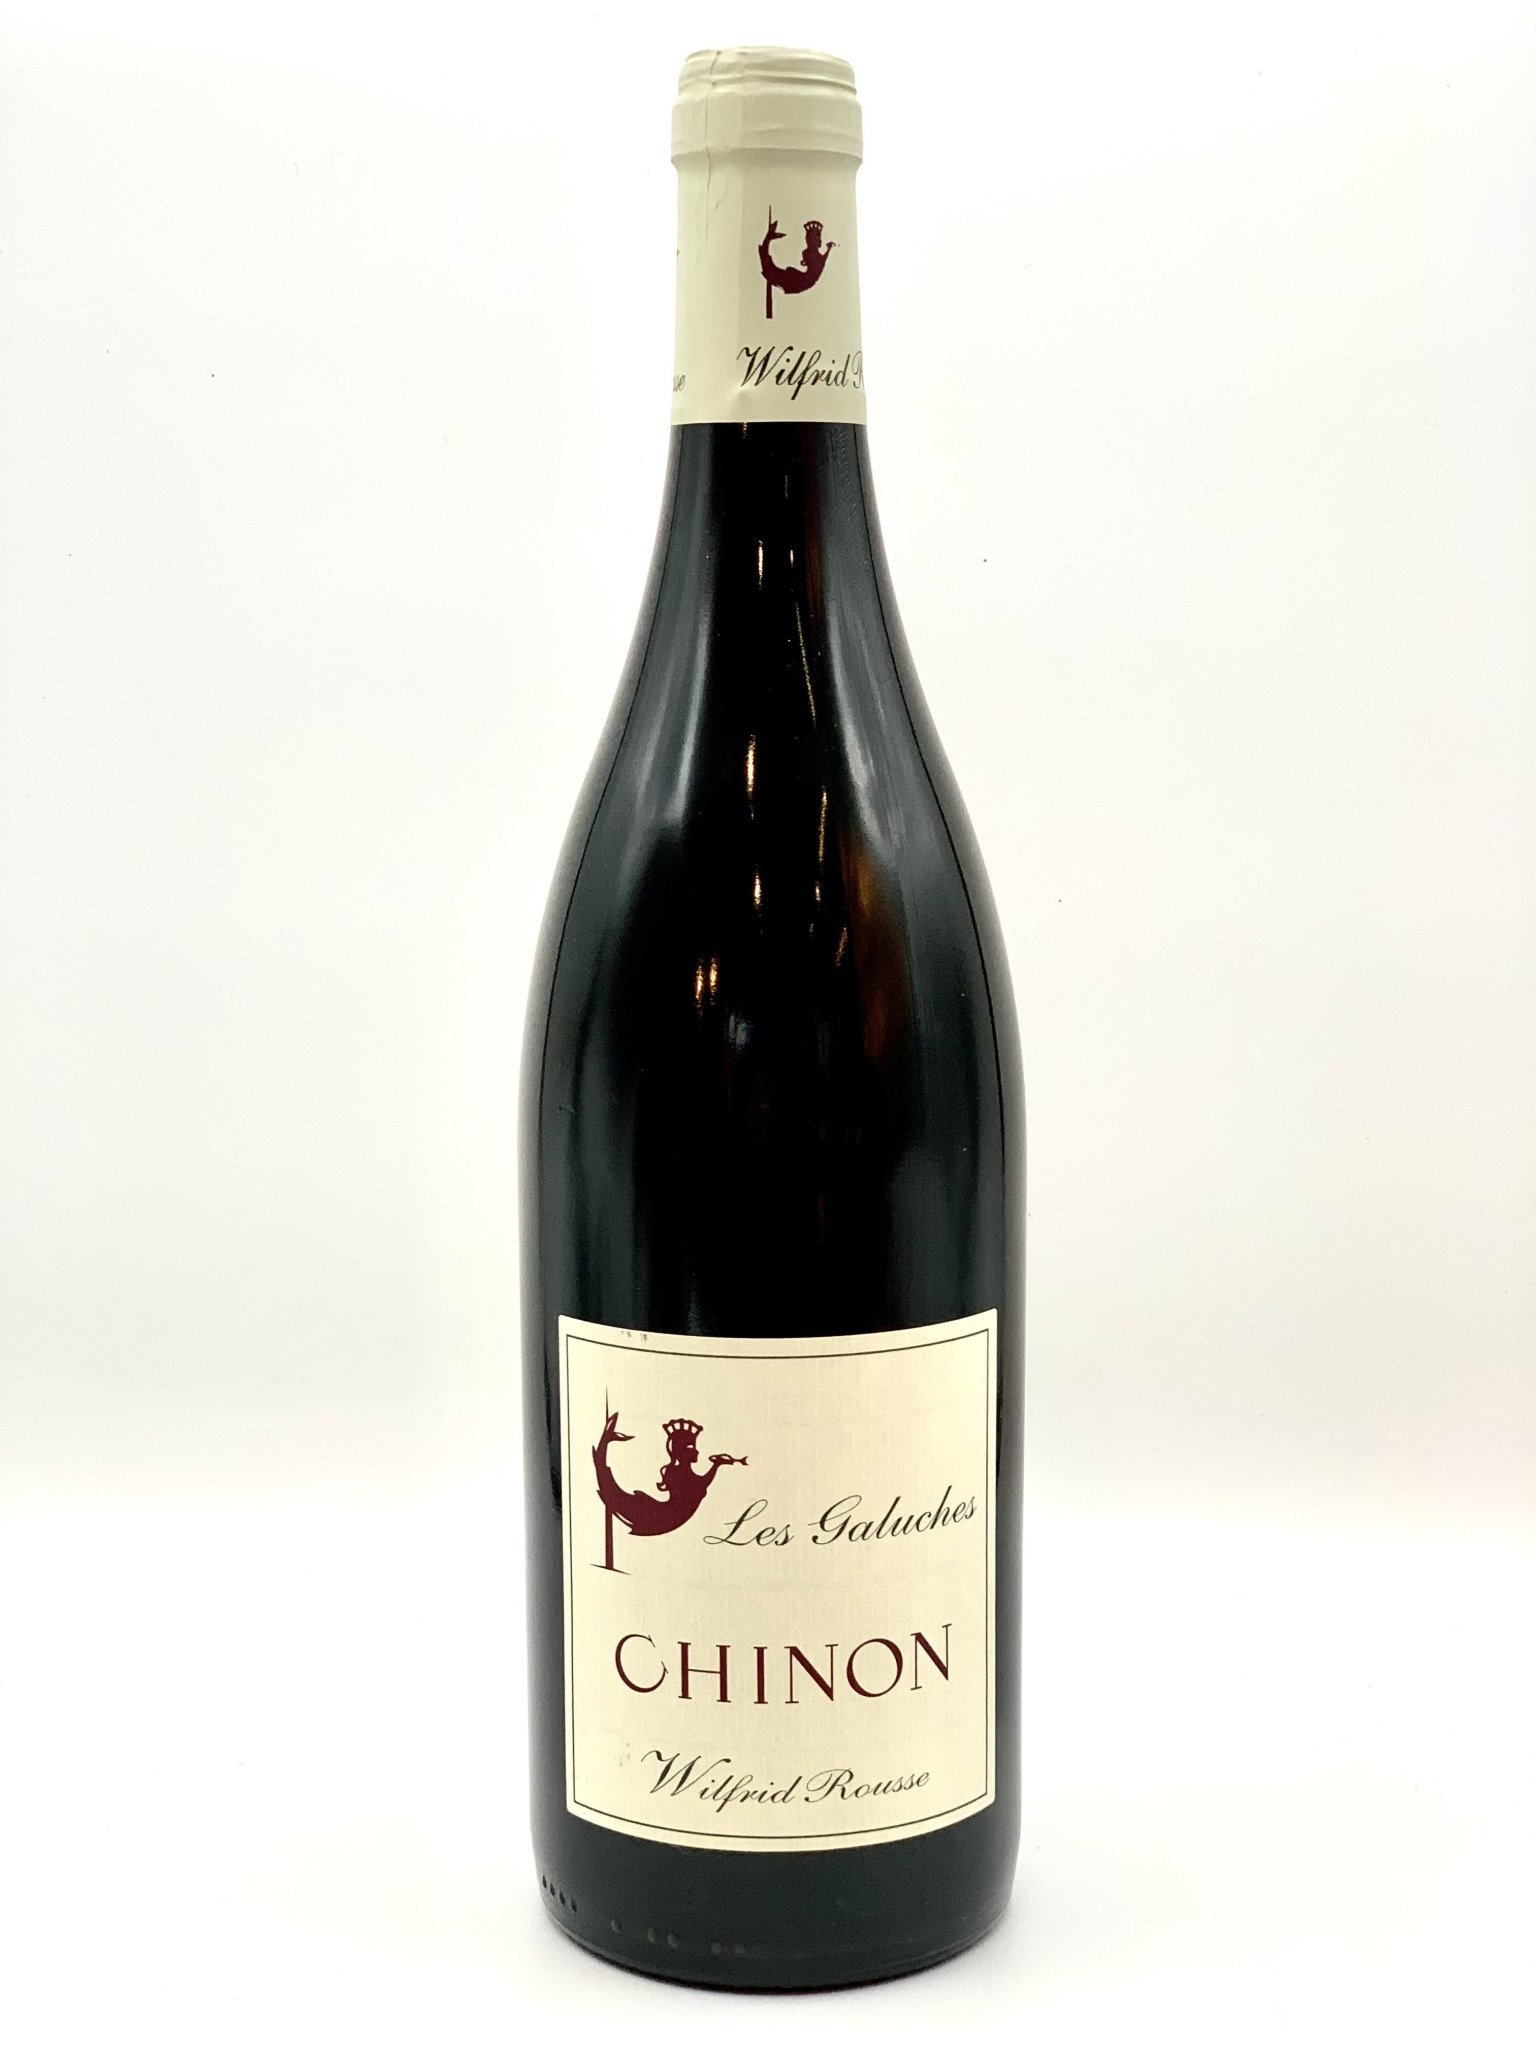 Chinon "Les Galuches" 2020 Domaine Wilfrid Rousse 750ml